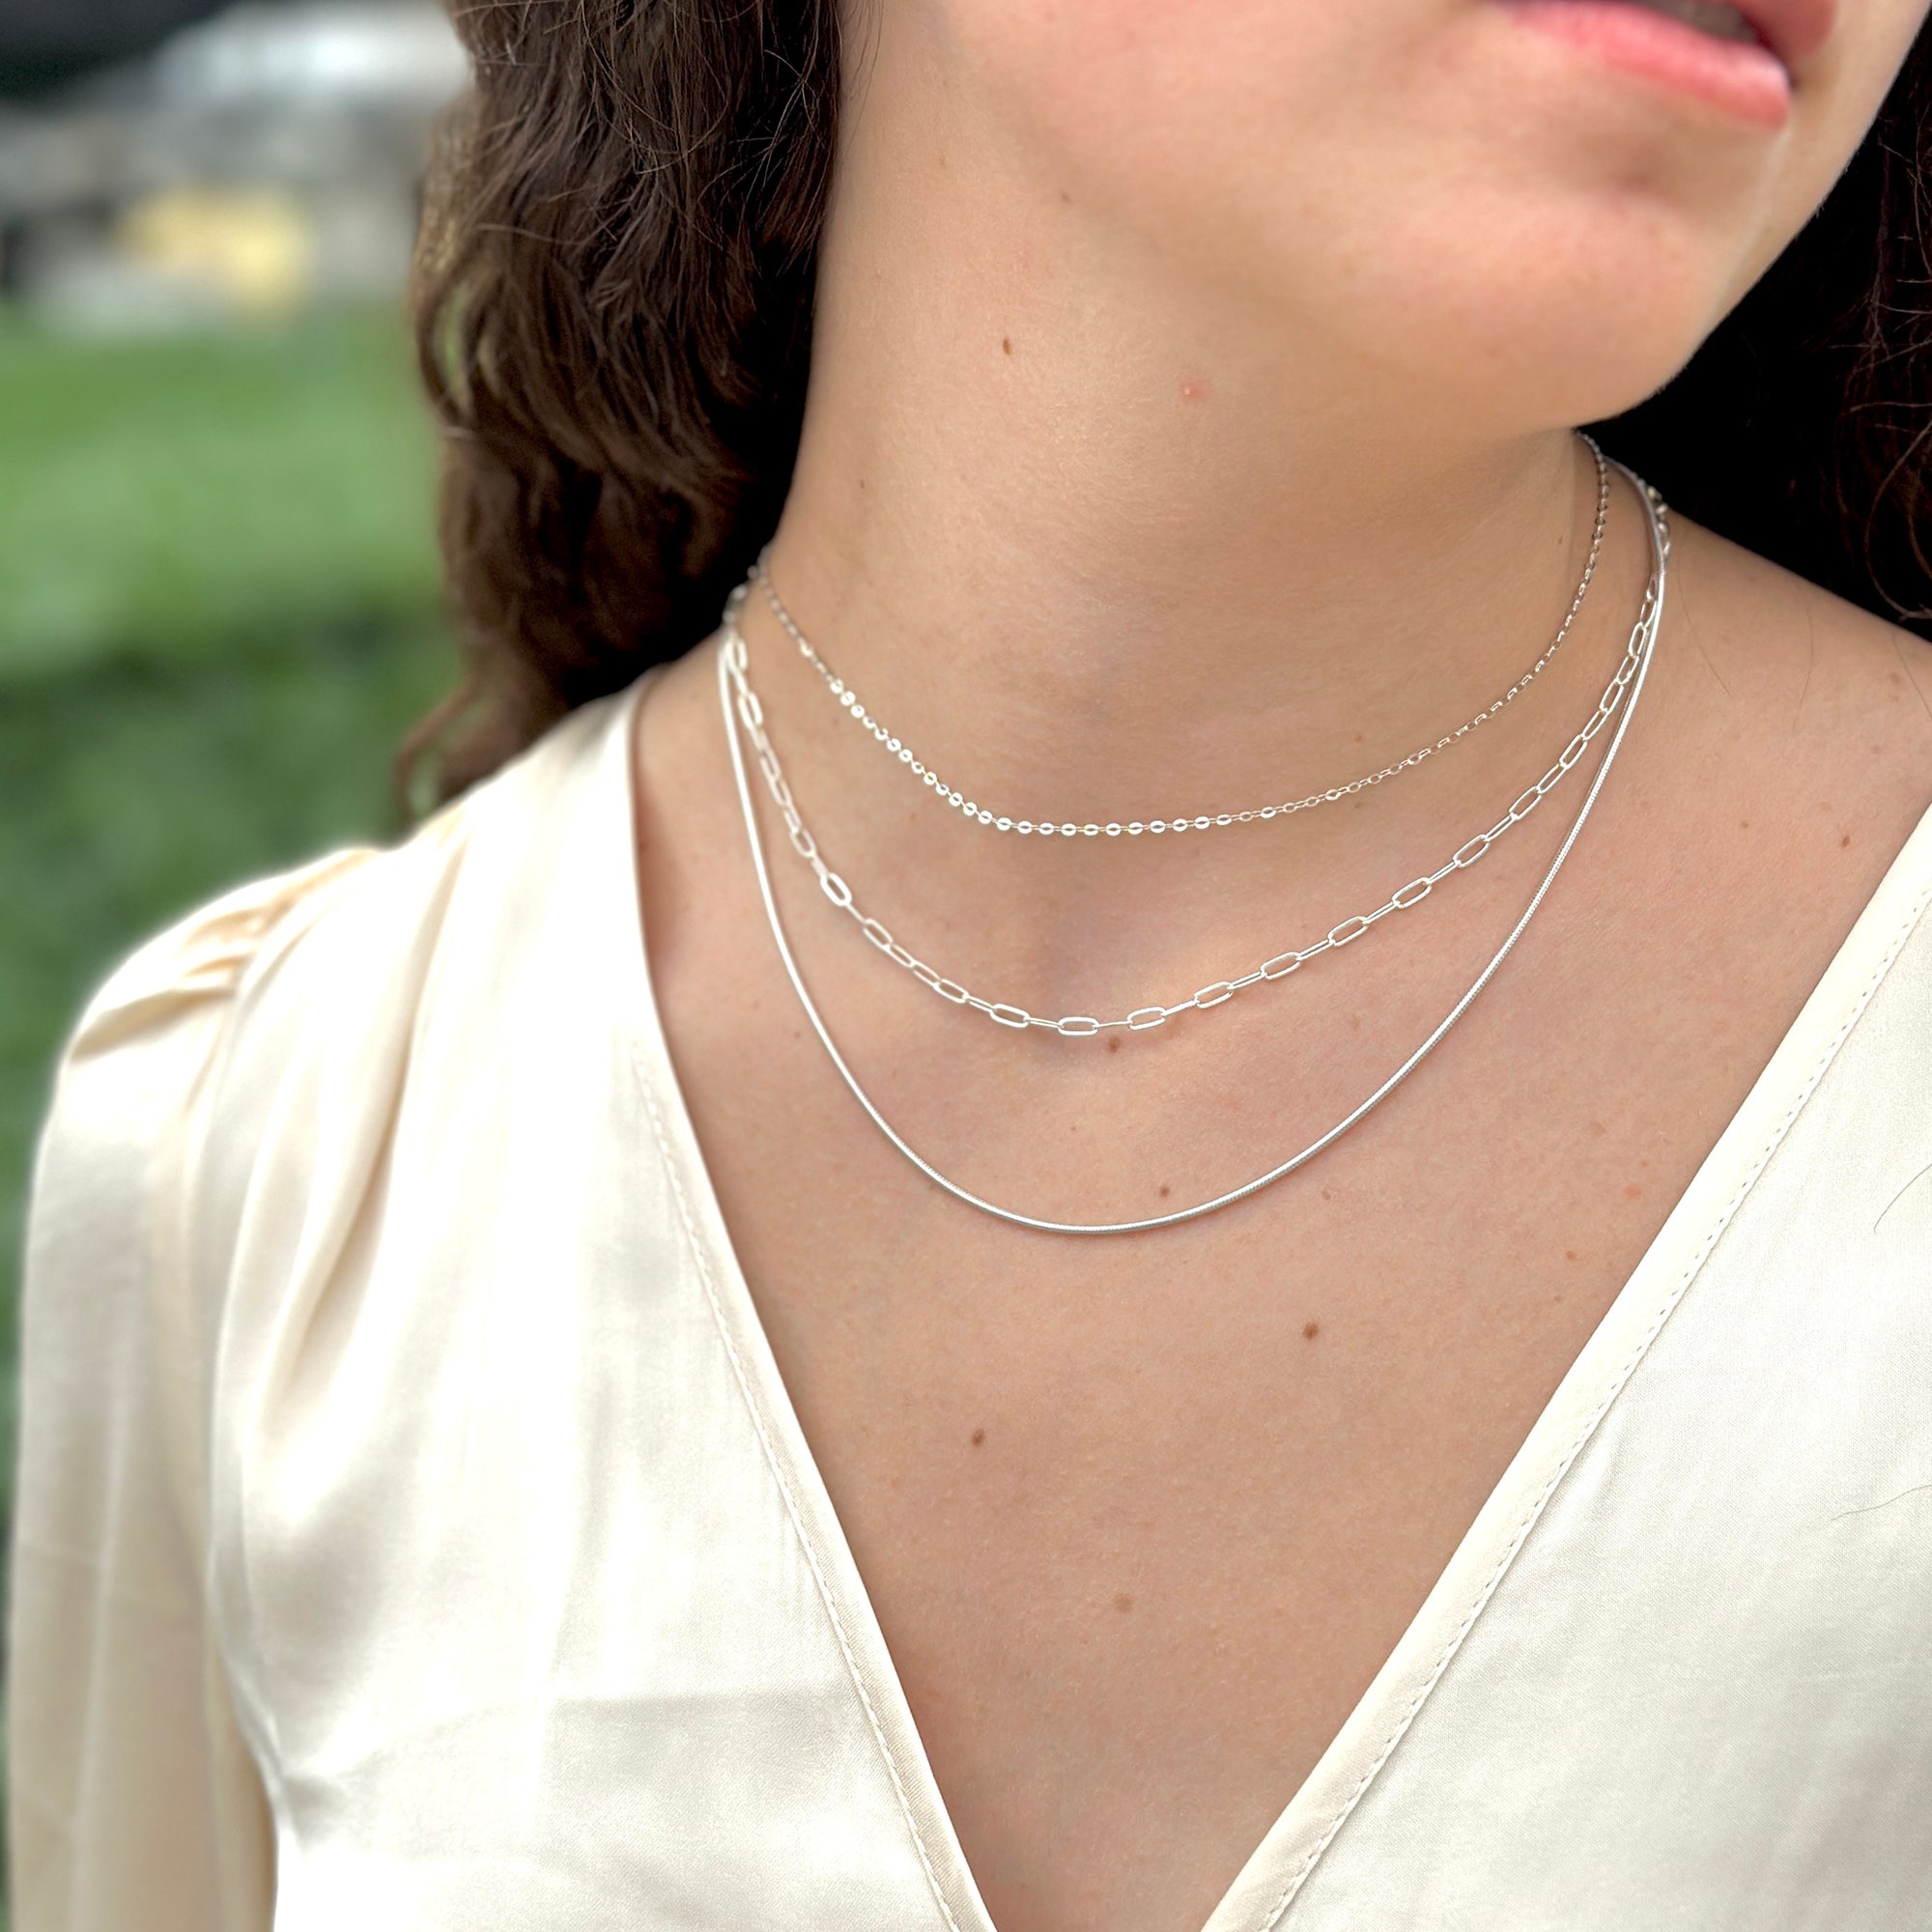 women wearing an elegant three necklace stack in sterling silver chains